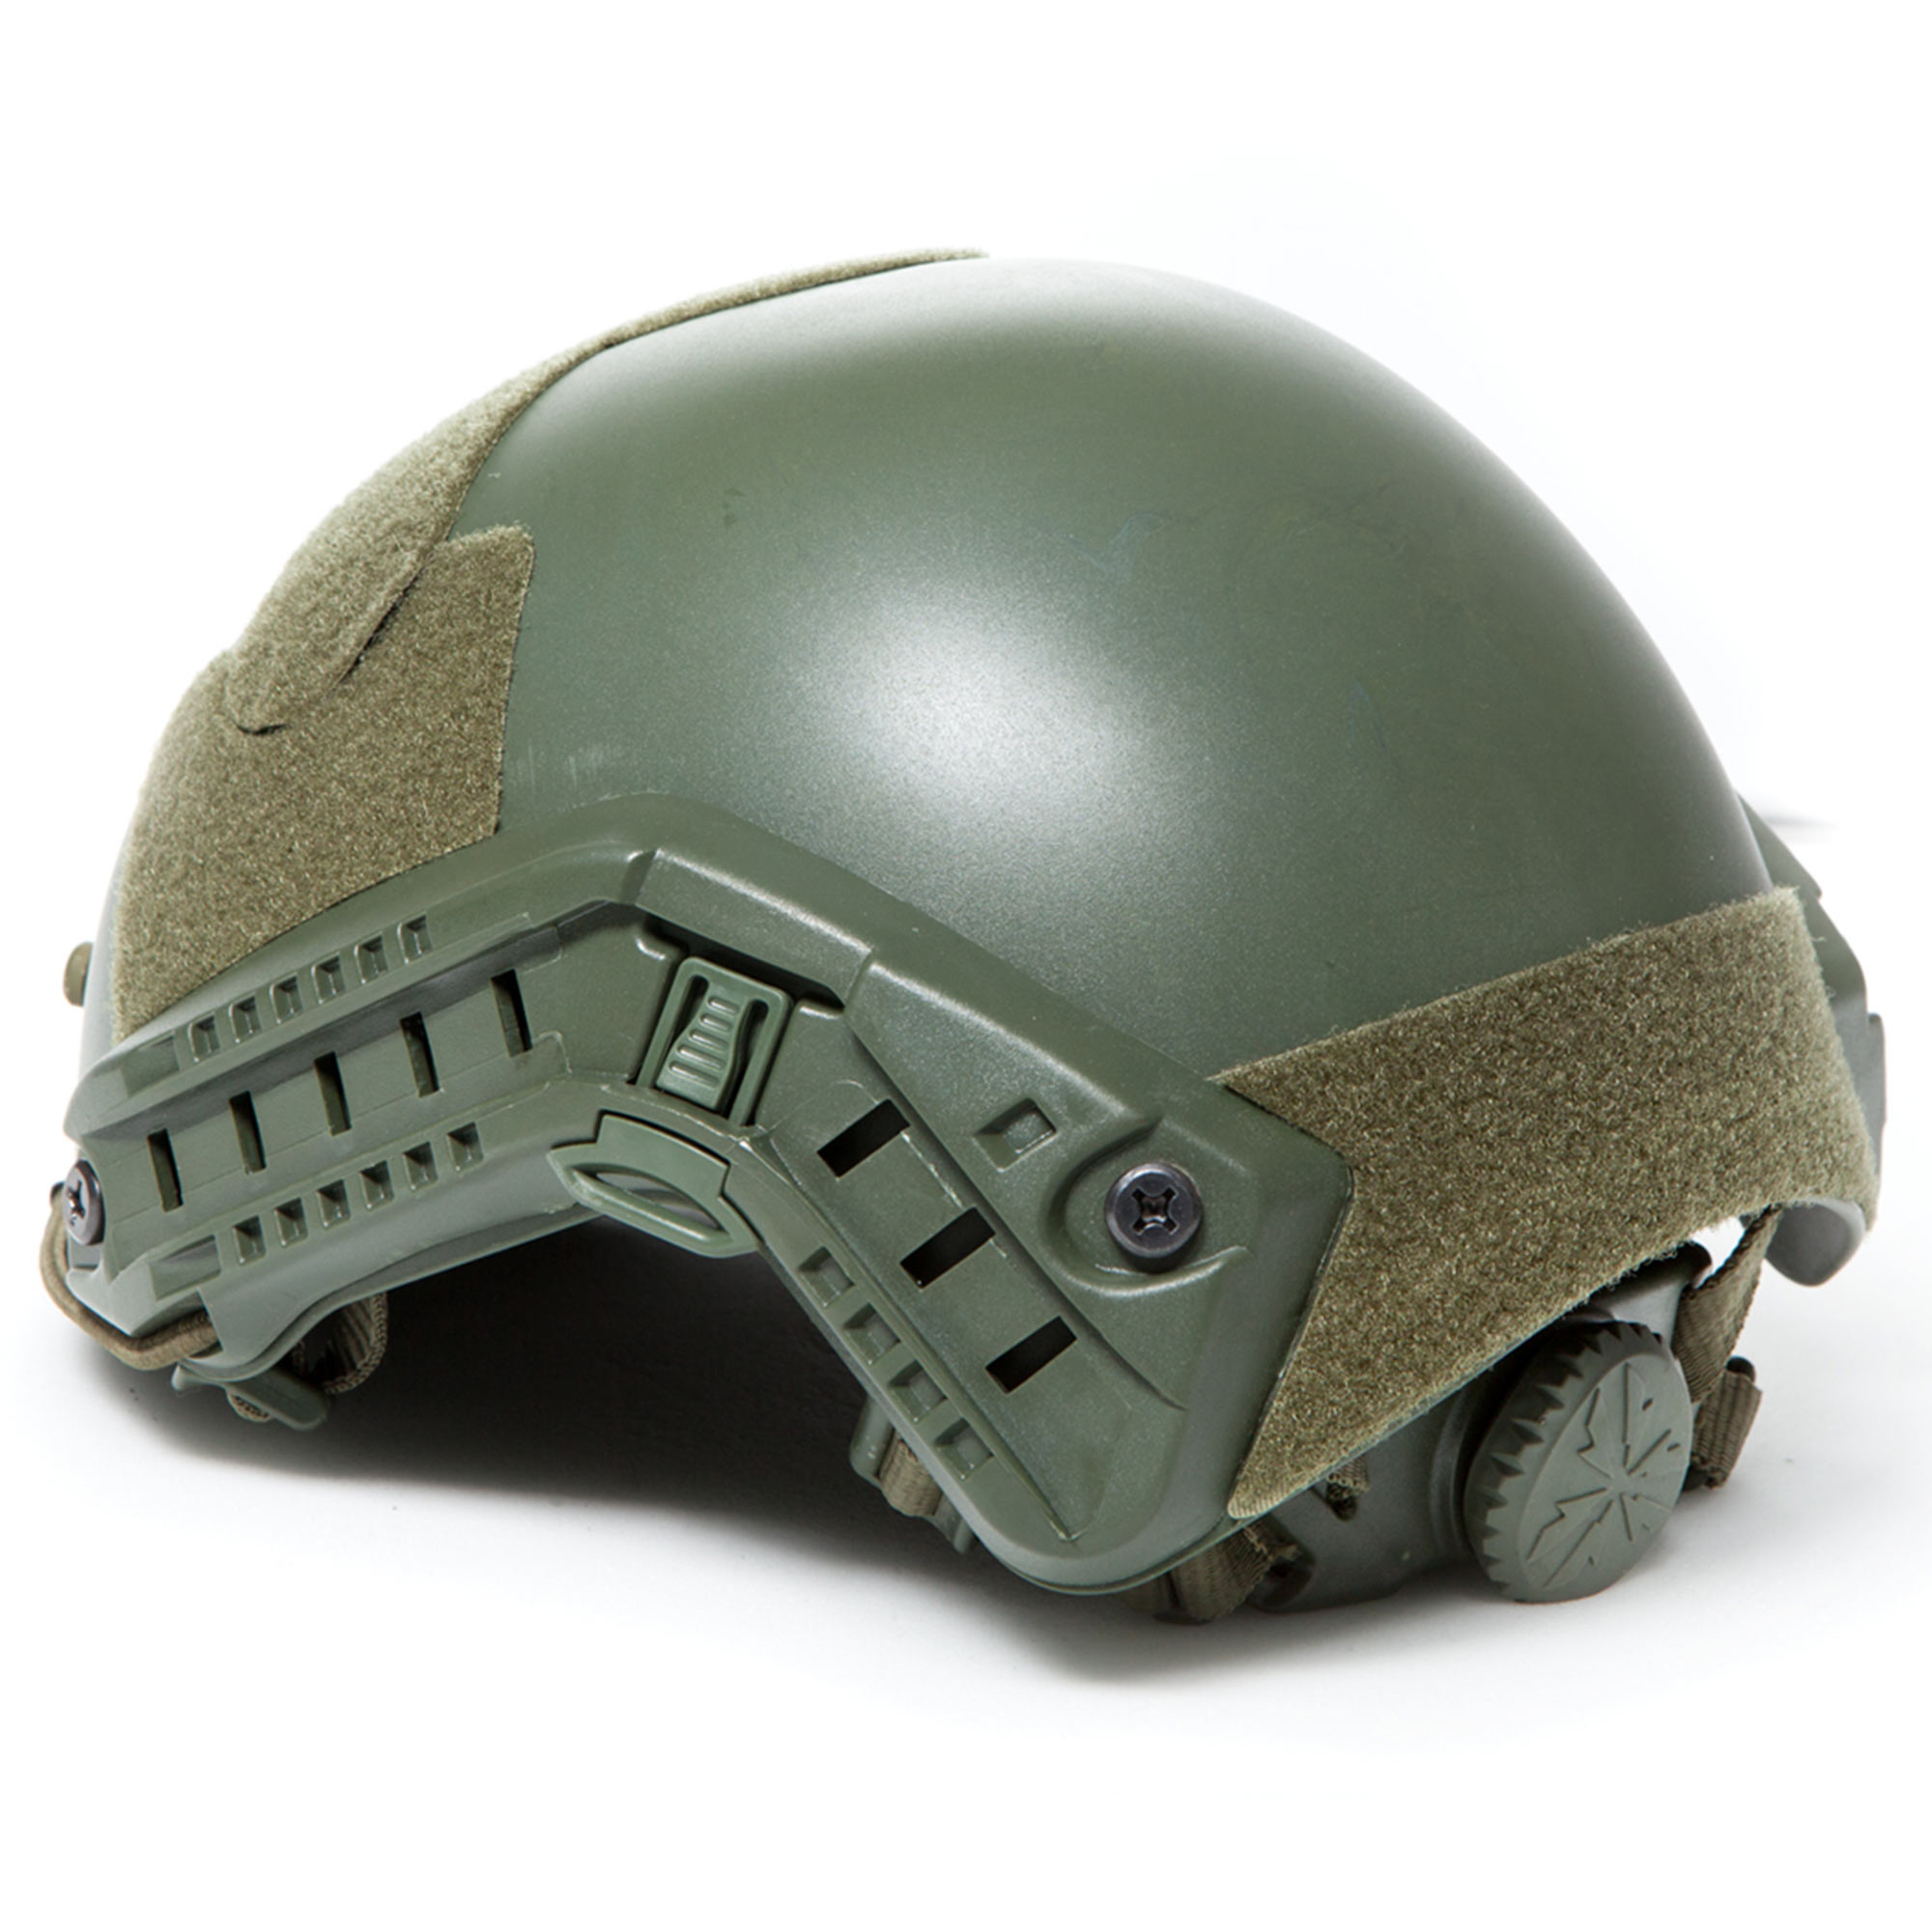 ASG Helm FAST - OD